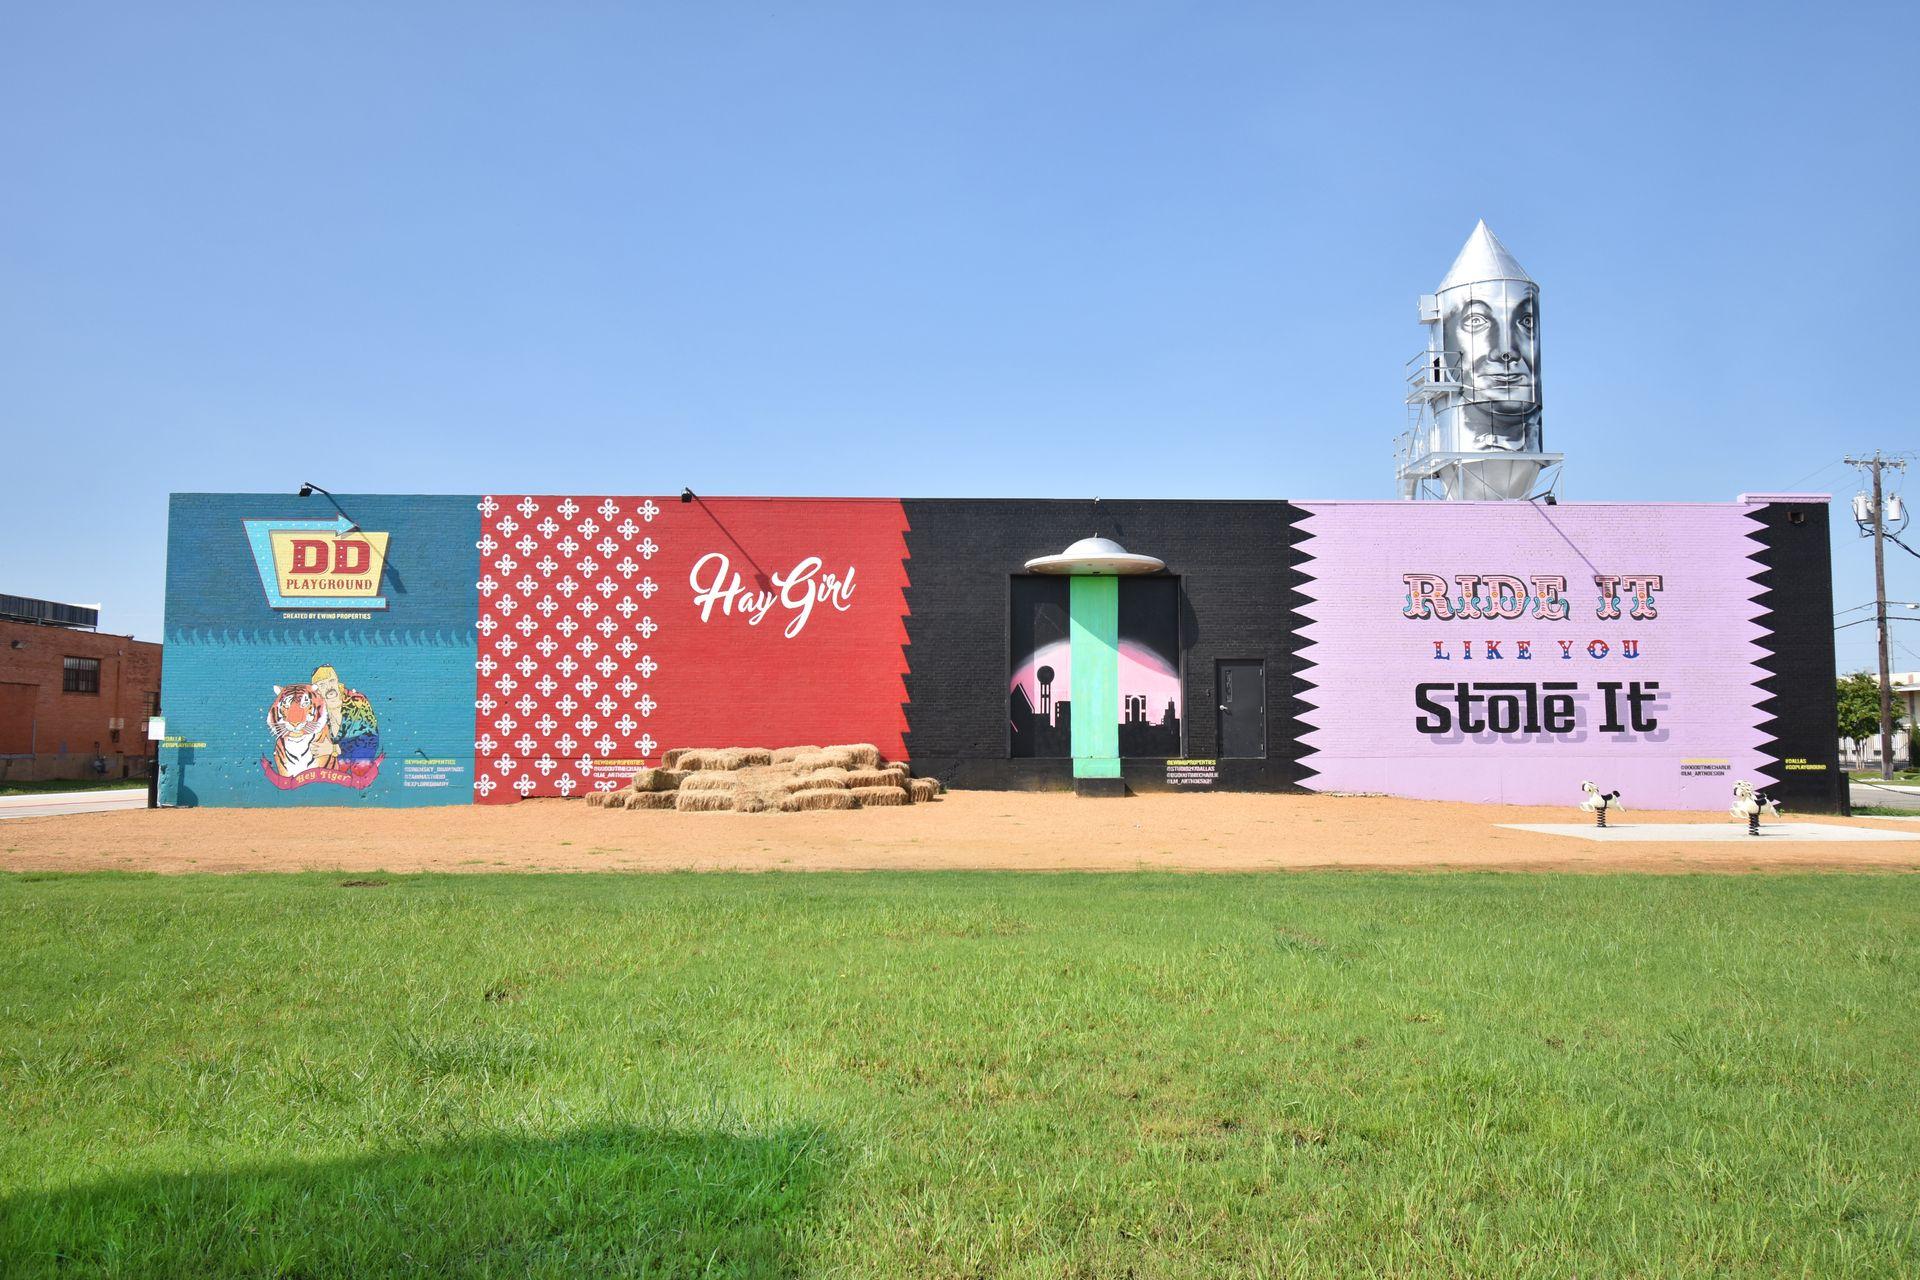 A wall of colorful murals, including one that says "Hay Girl" with hay bails below it and a pink wall that says "Ride it like you Stole It" with pony rides below it.